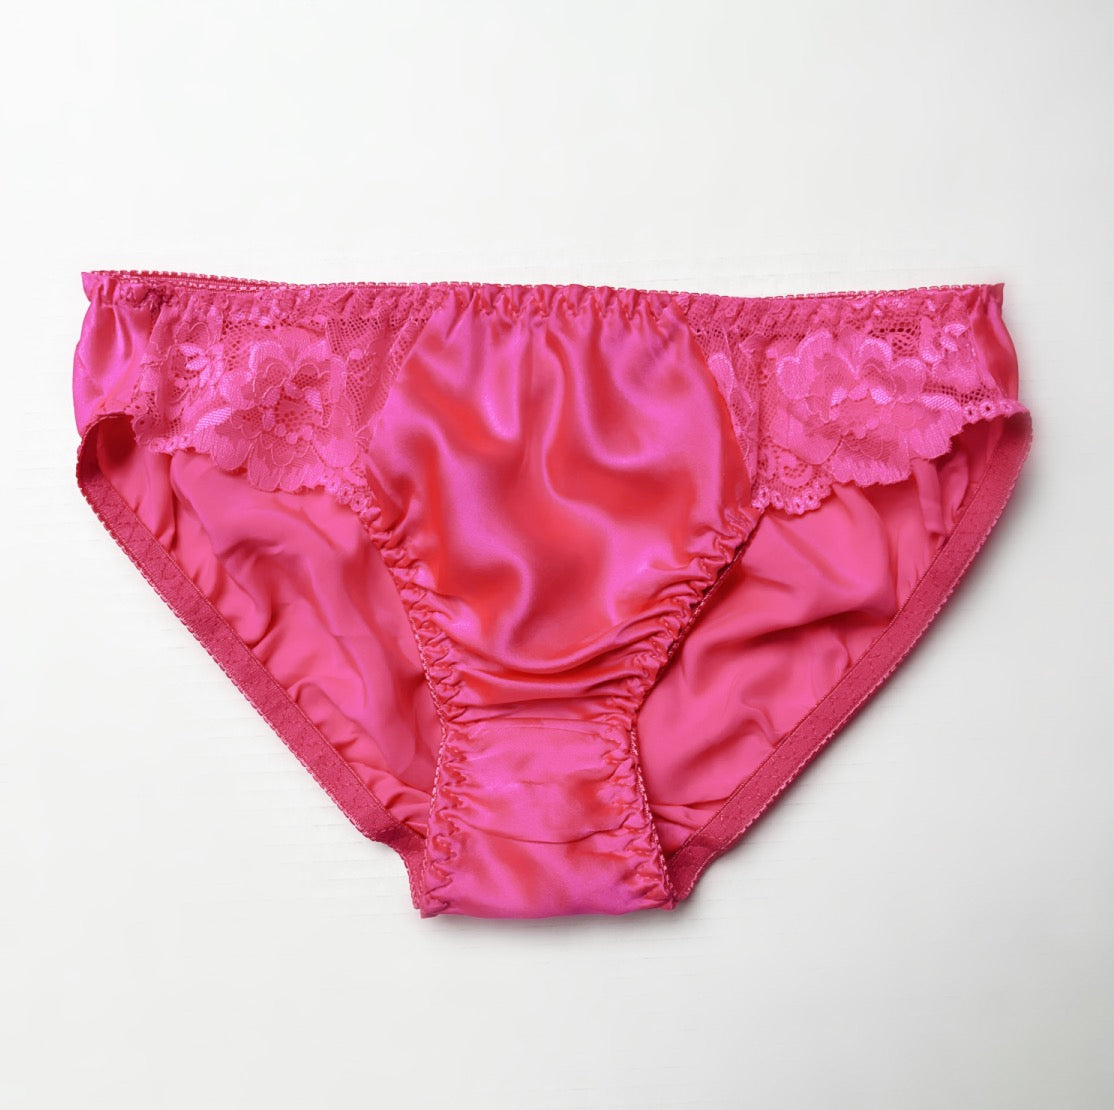 Wholesale Pink Silk Underwear Cotton, Lace, Seamless, Shaping